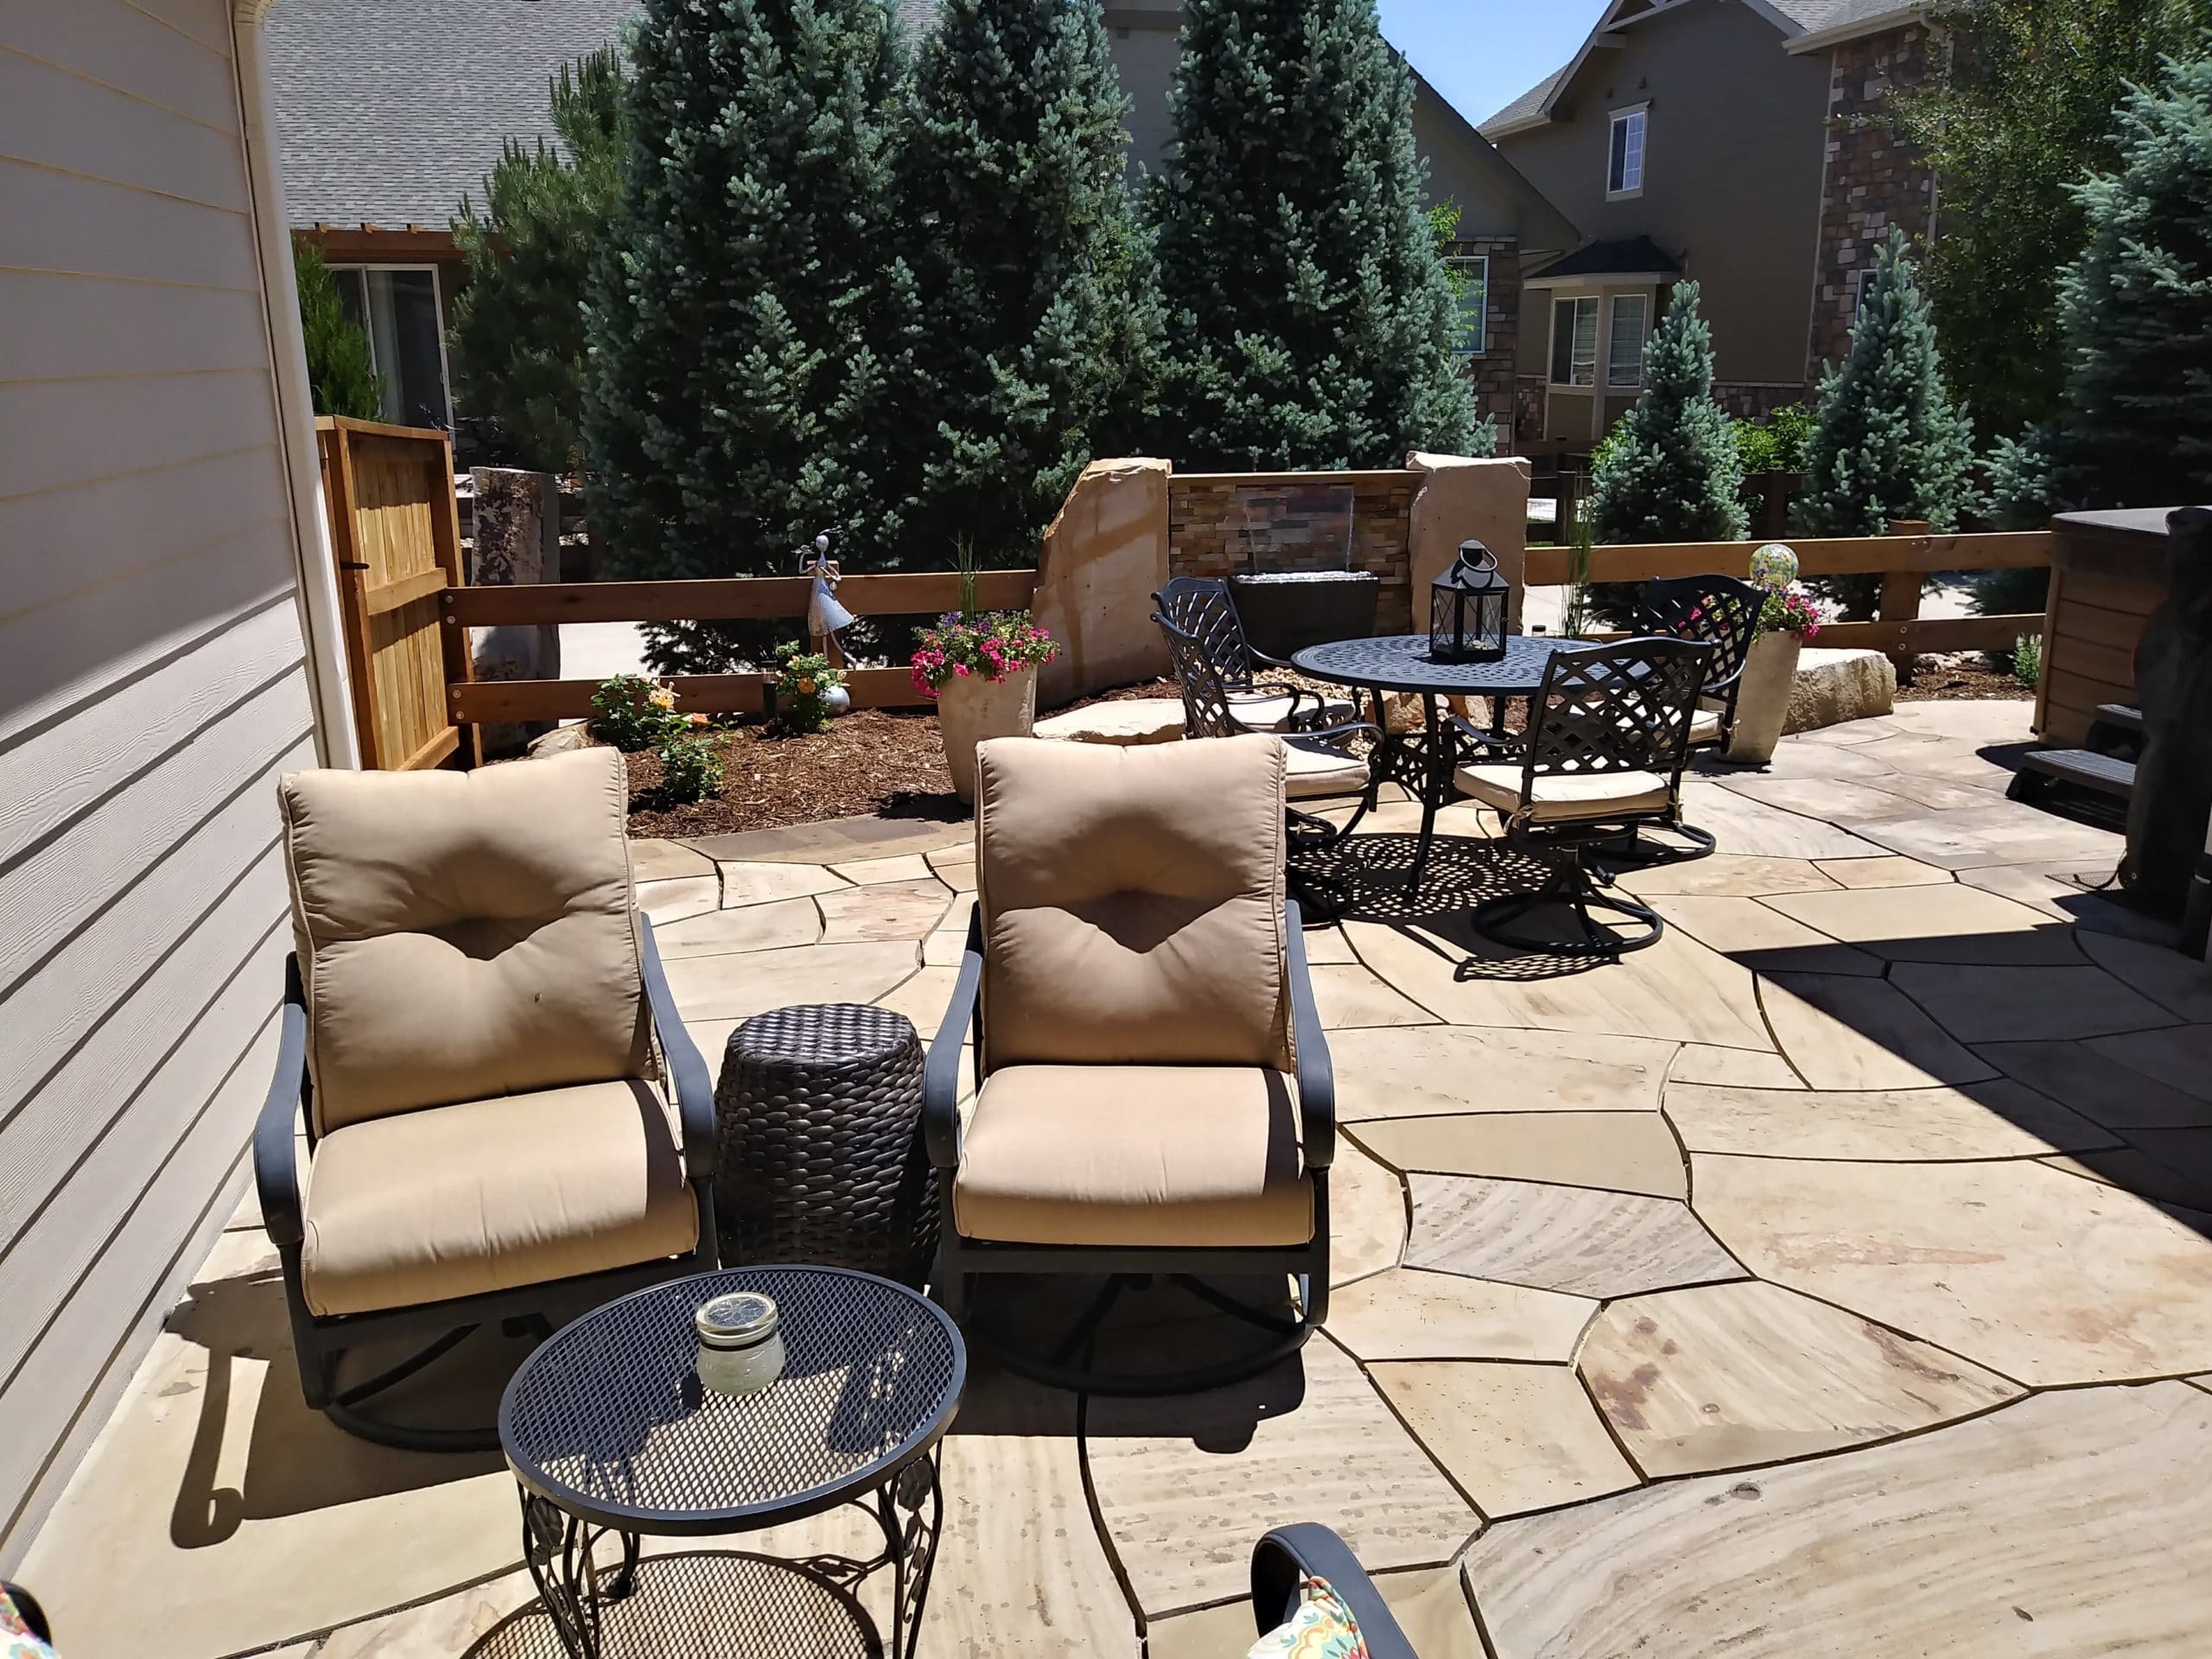 Flat stone patio with seating area.